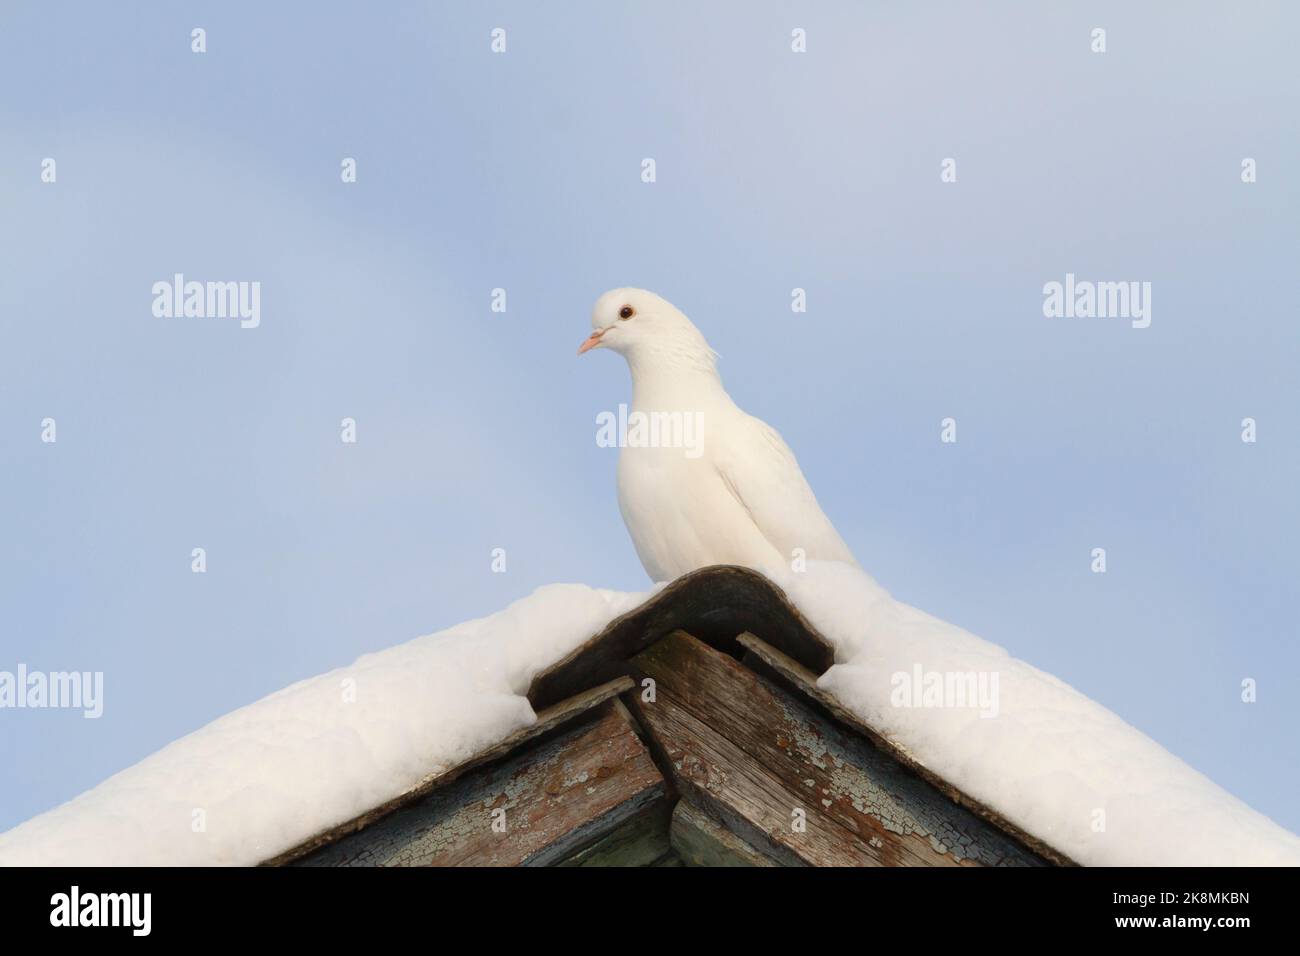 white dove symbol of peace sits on a roof covered with snow Stock Photo